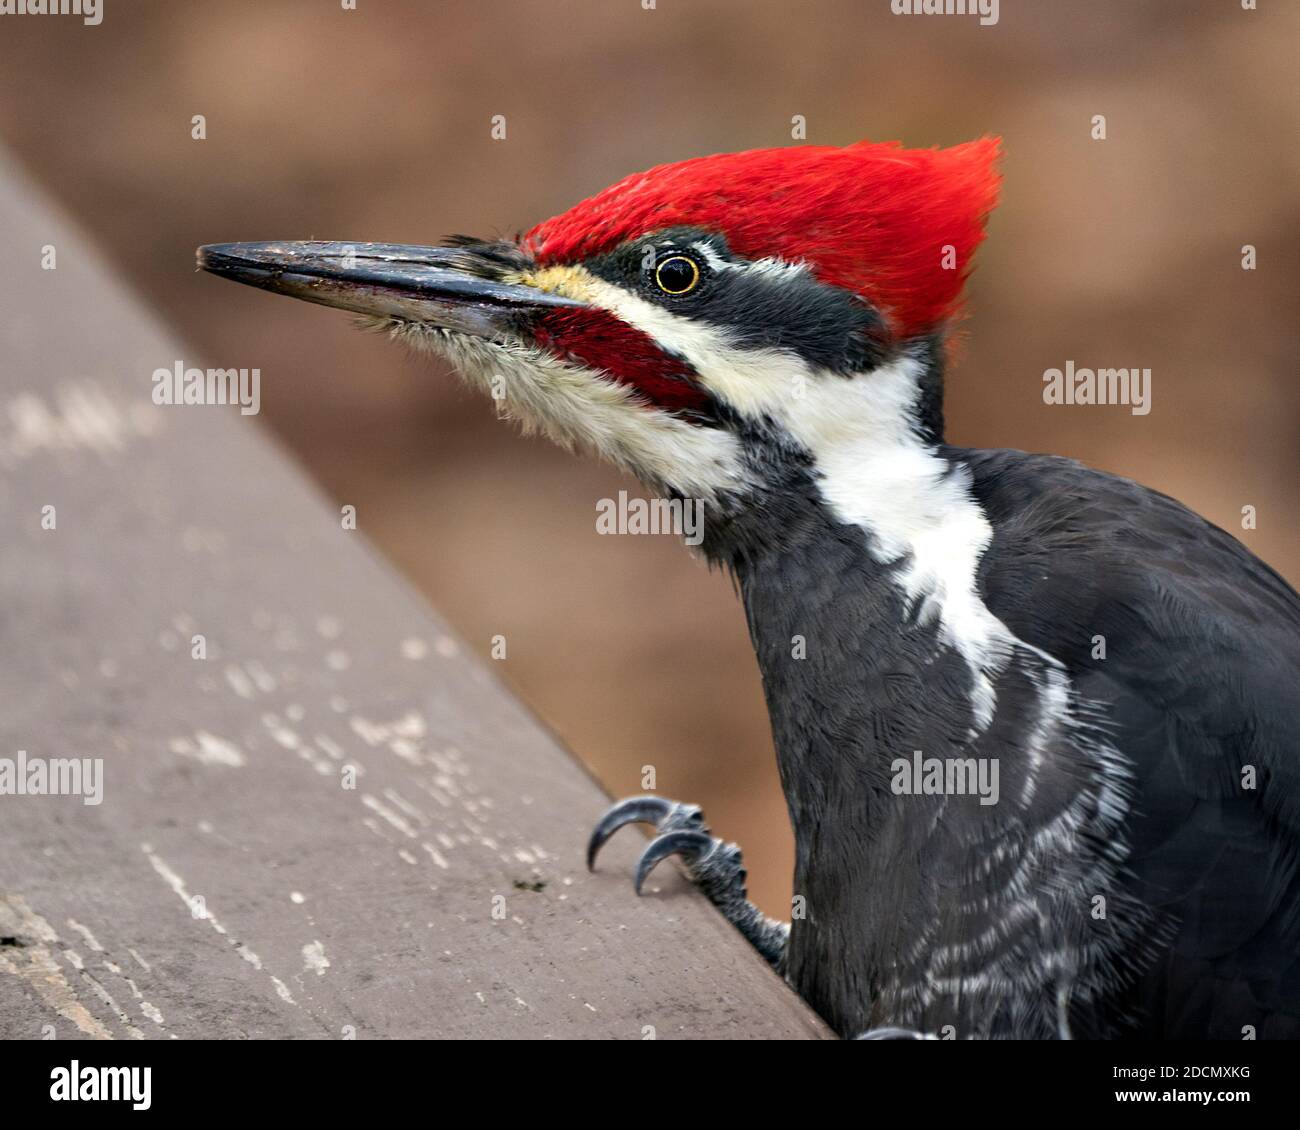 Woodpecker head close-up profile view perched with a blur background, in its environment and habitat. Head shot. Woodpecker stock photos. Image. Stock Photo